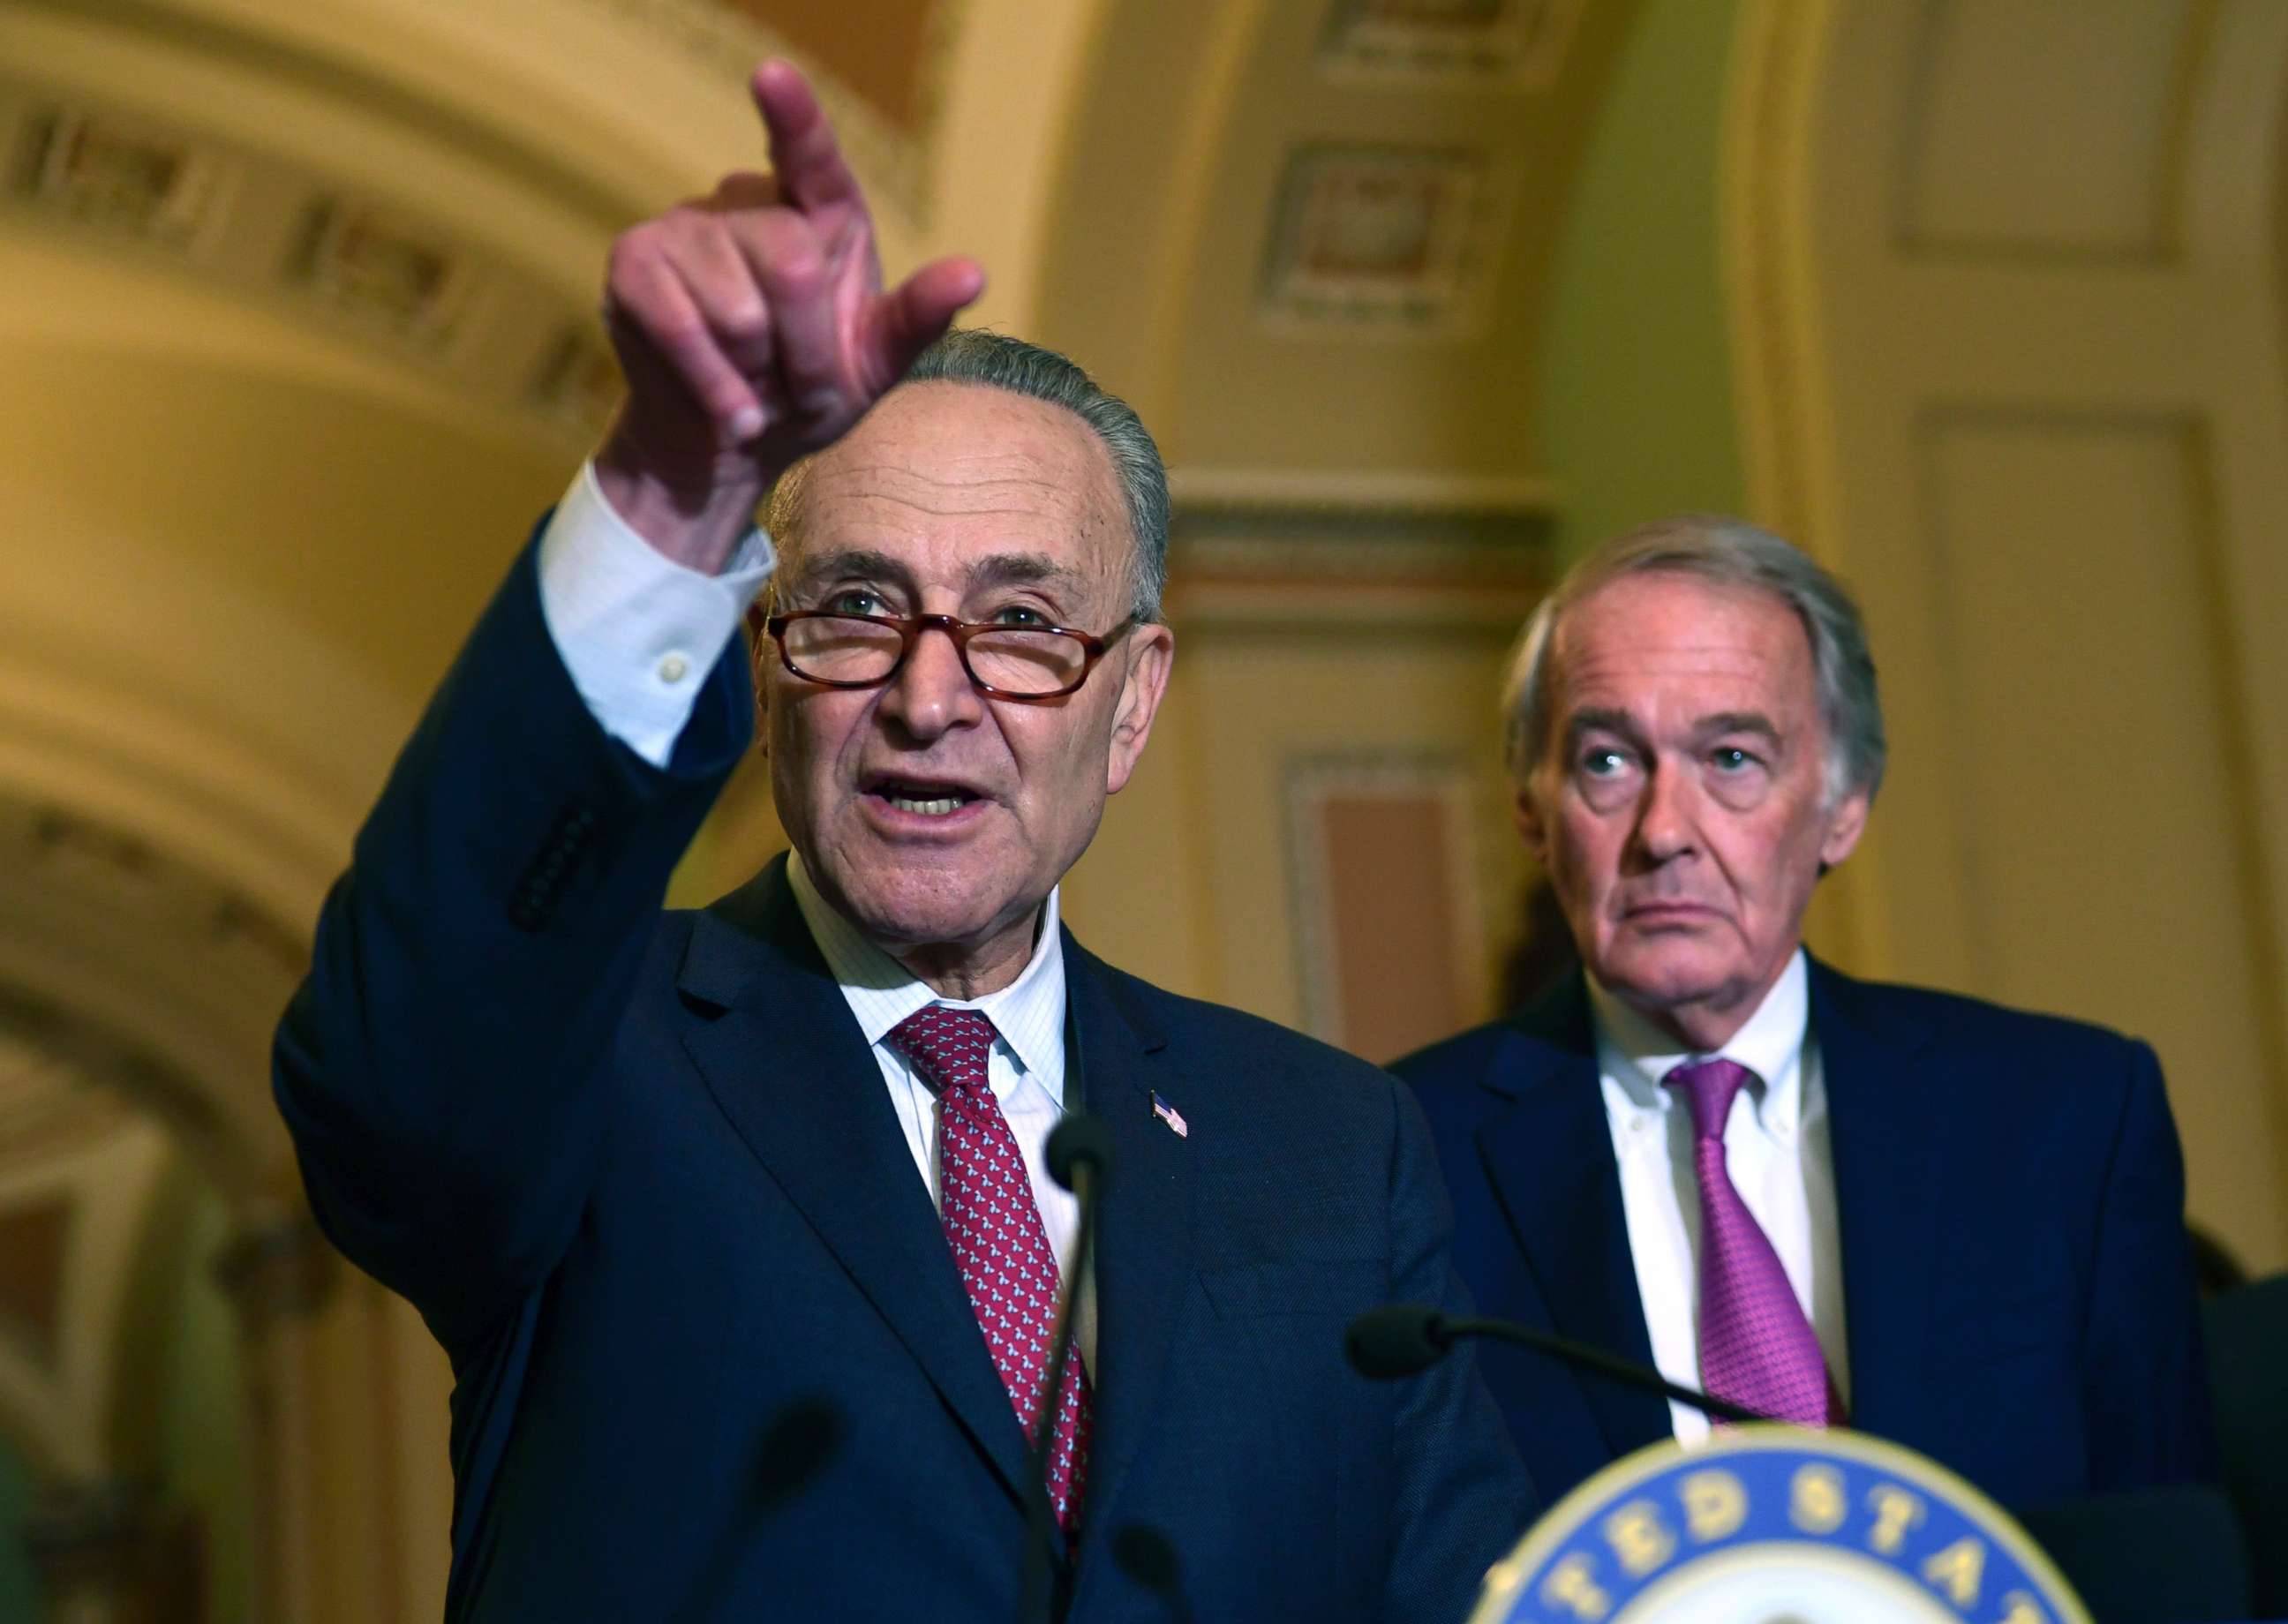 PHOTO: Senate Minority Leader Sen. Chuck Schumer of N.Y., standing with Sen. Edward Markey, D-Mass., speaks to reporters following the weekly Democratic policy luncheon on Capitol Hill in Washington, Oct. 31, 2017. 